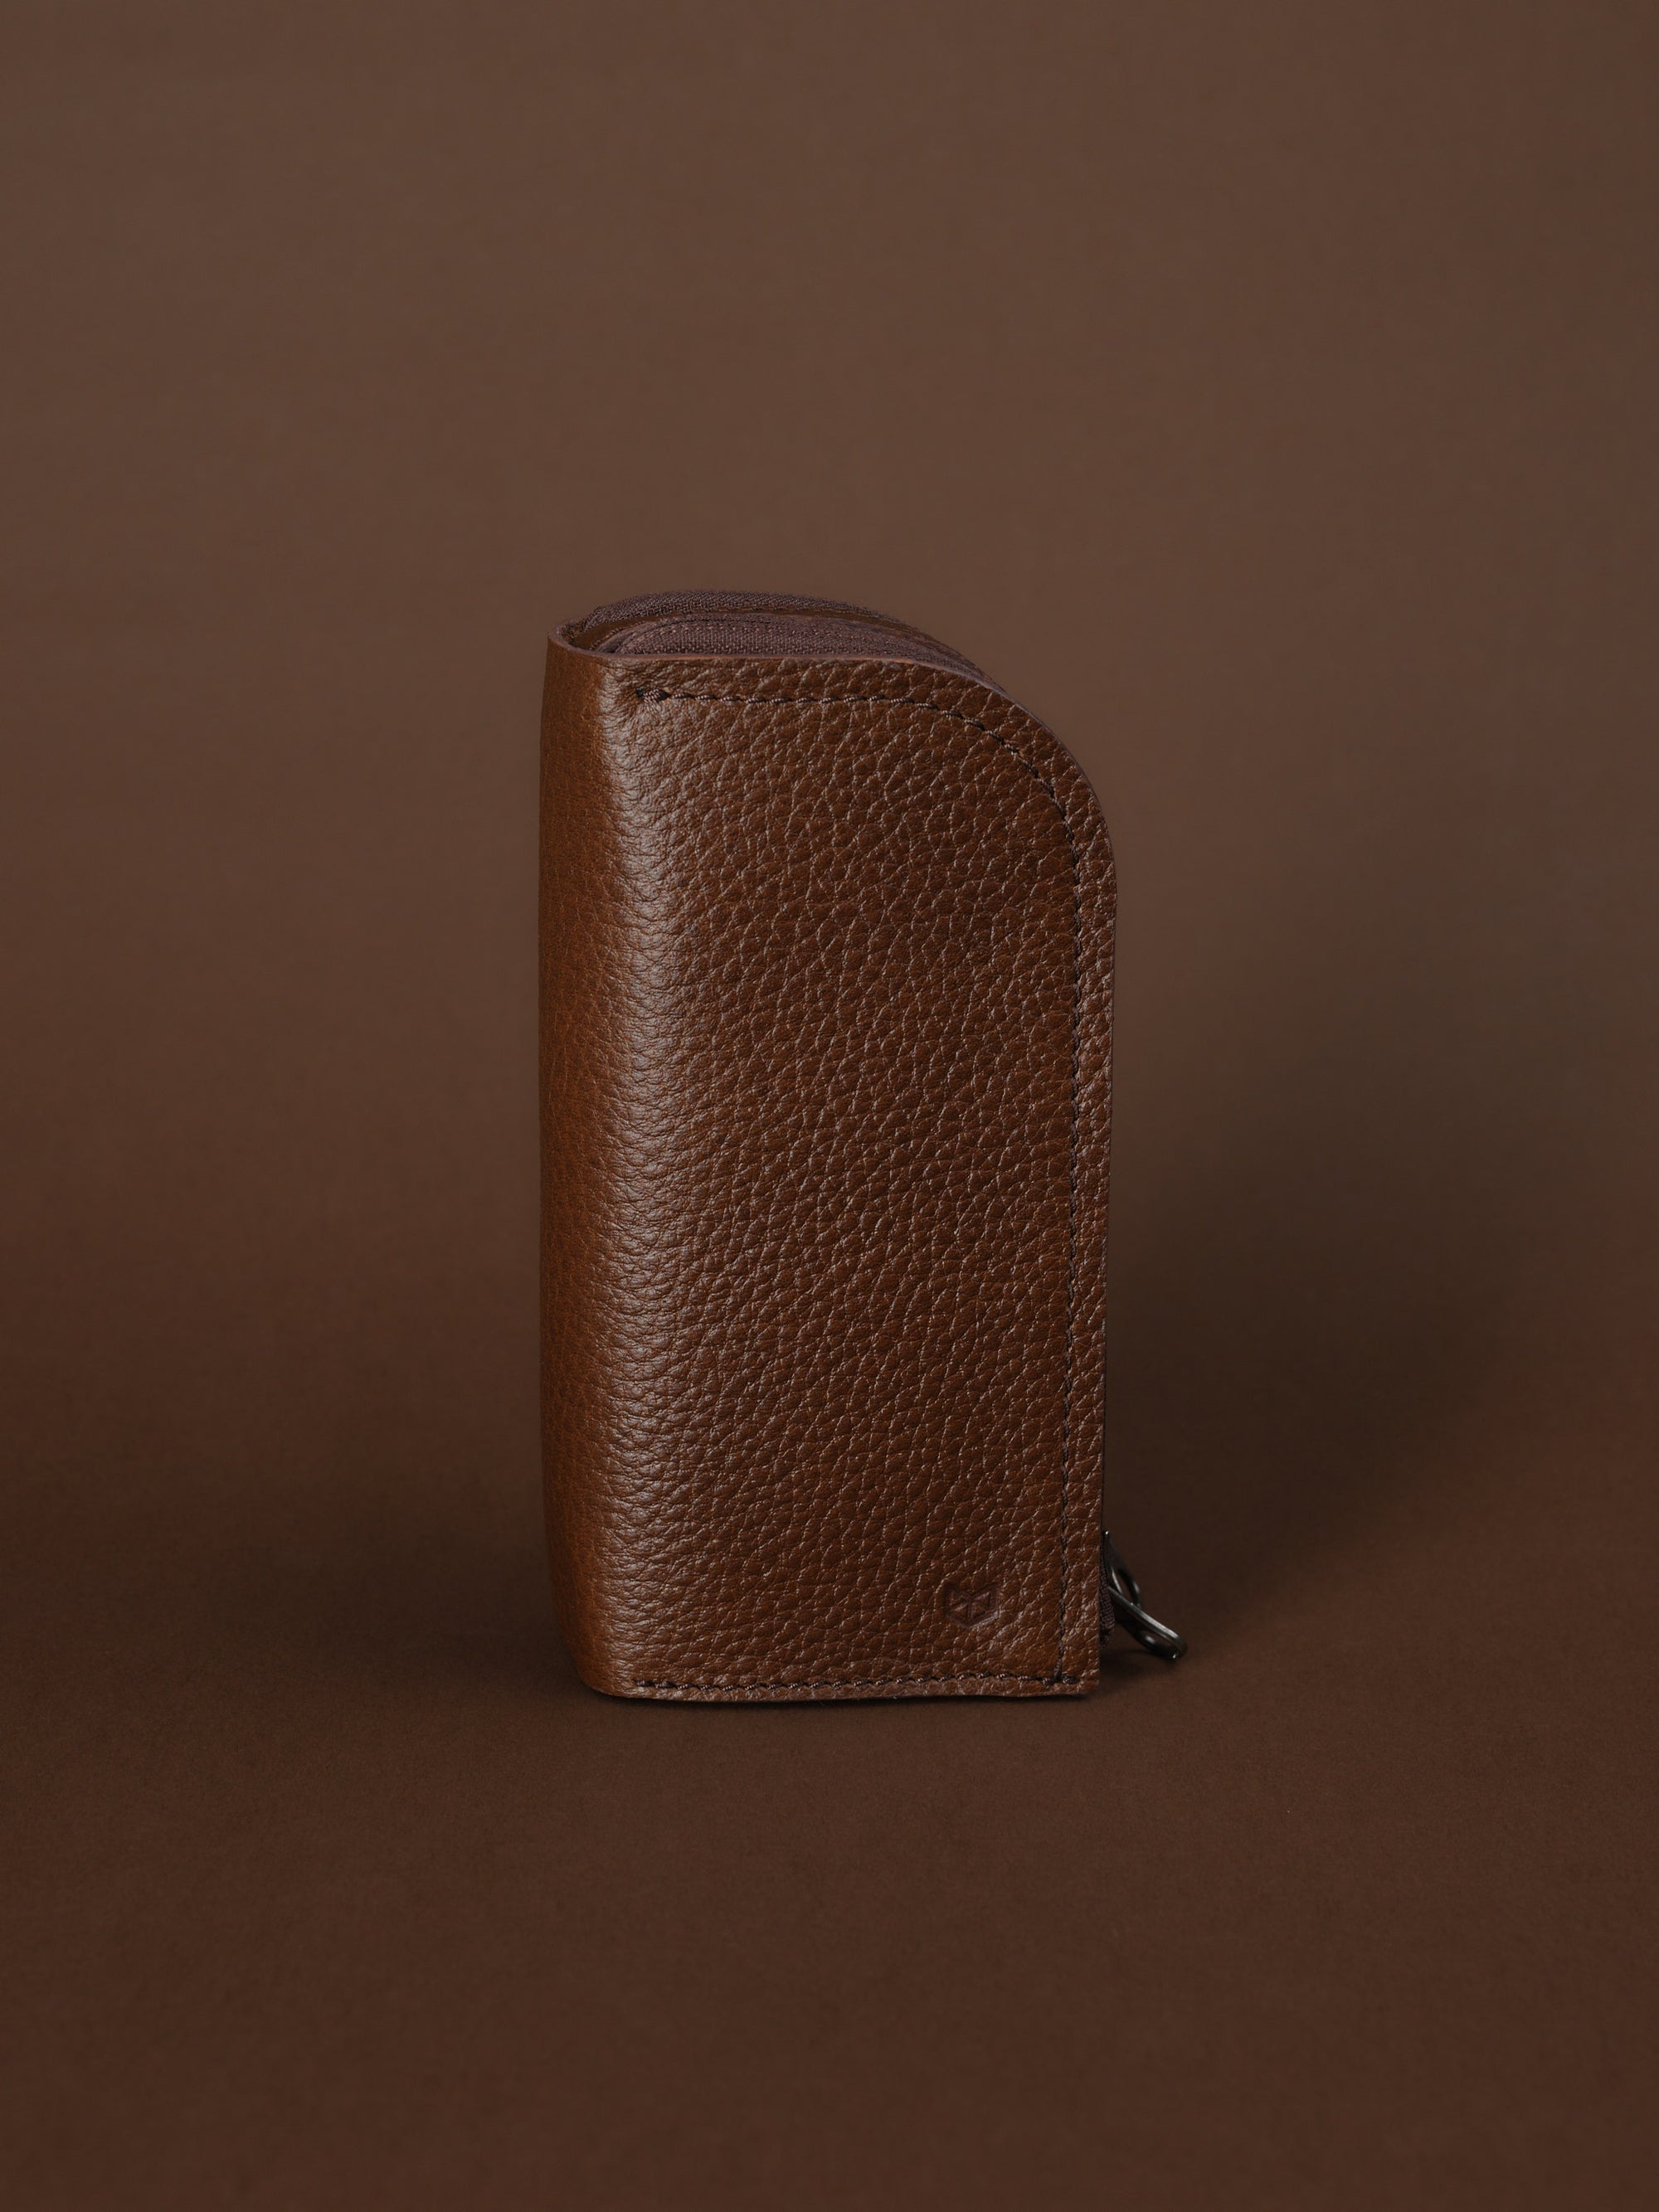 hard shell eyeglass case brown by Capra Leather